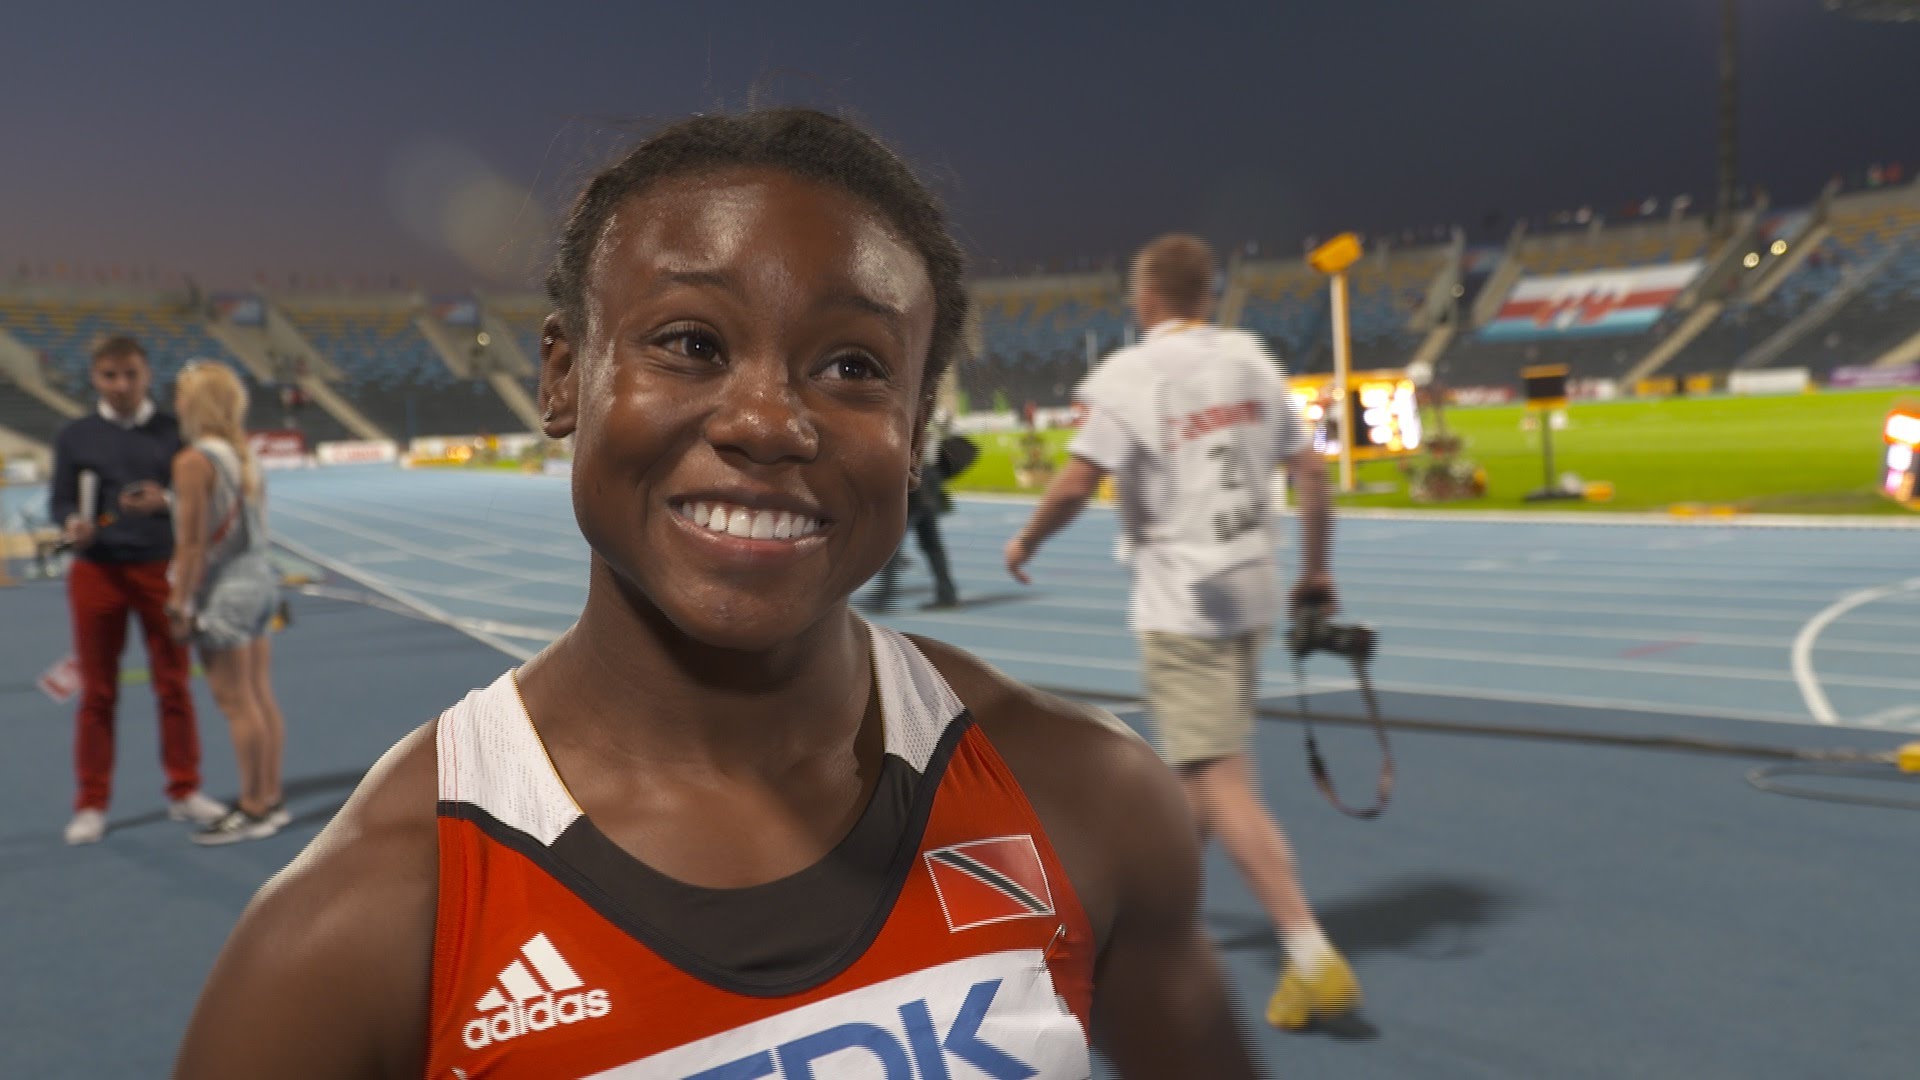 VIDEO: St Fort, bronze medal 100m #WU20Champs